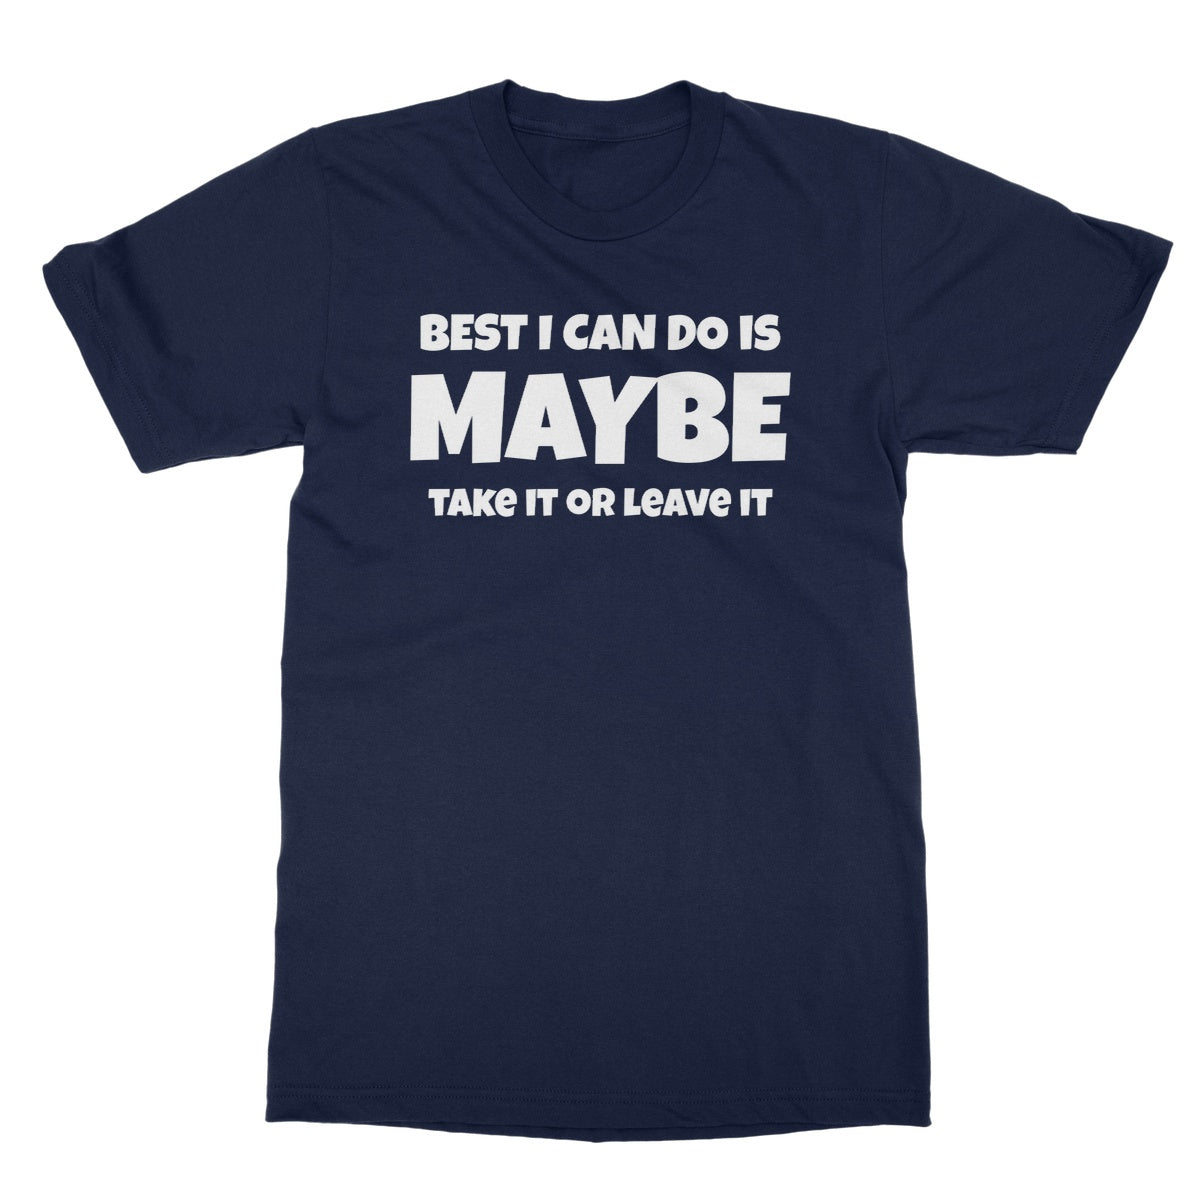 best I can do is maybe t shirt navy